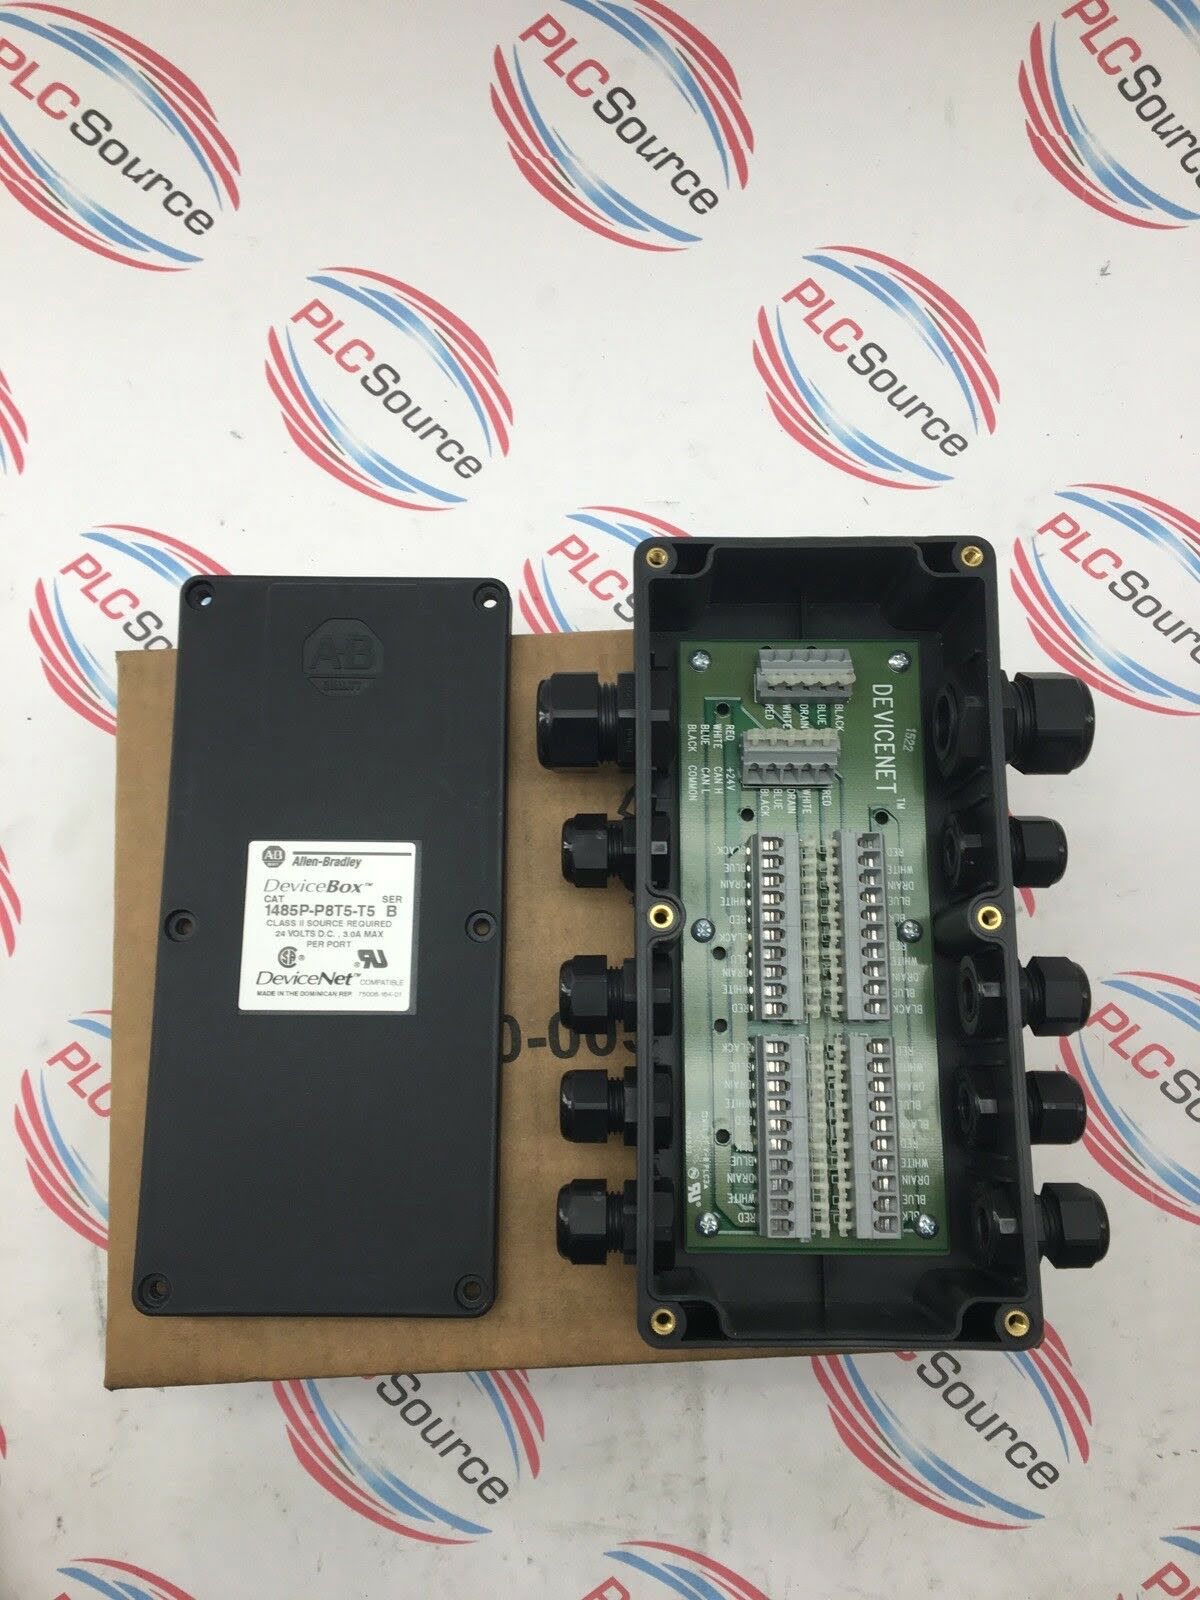 Allen Bradley 1485P-P1N5-MN5L1 Series A Connector Multiport NEW IN BOX  製造、工場用